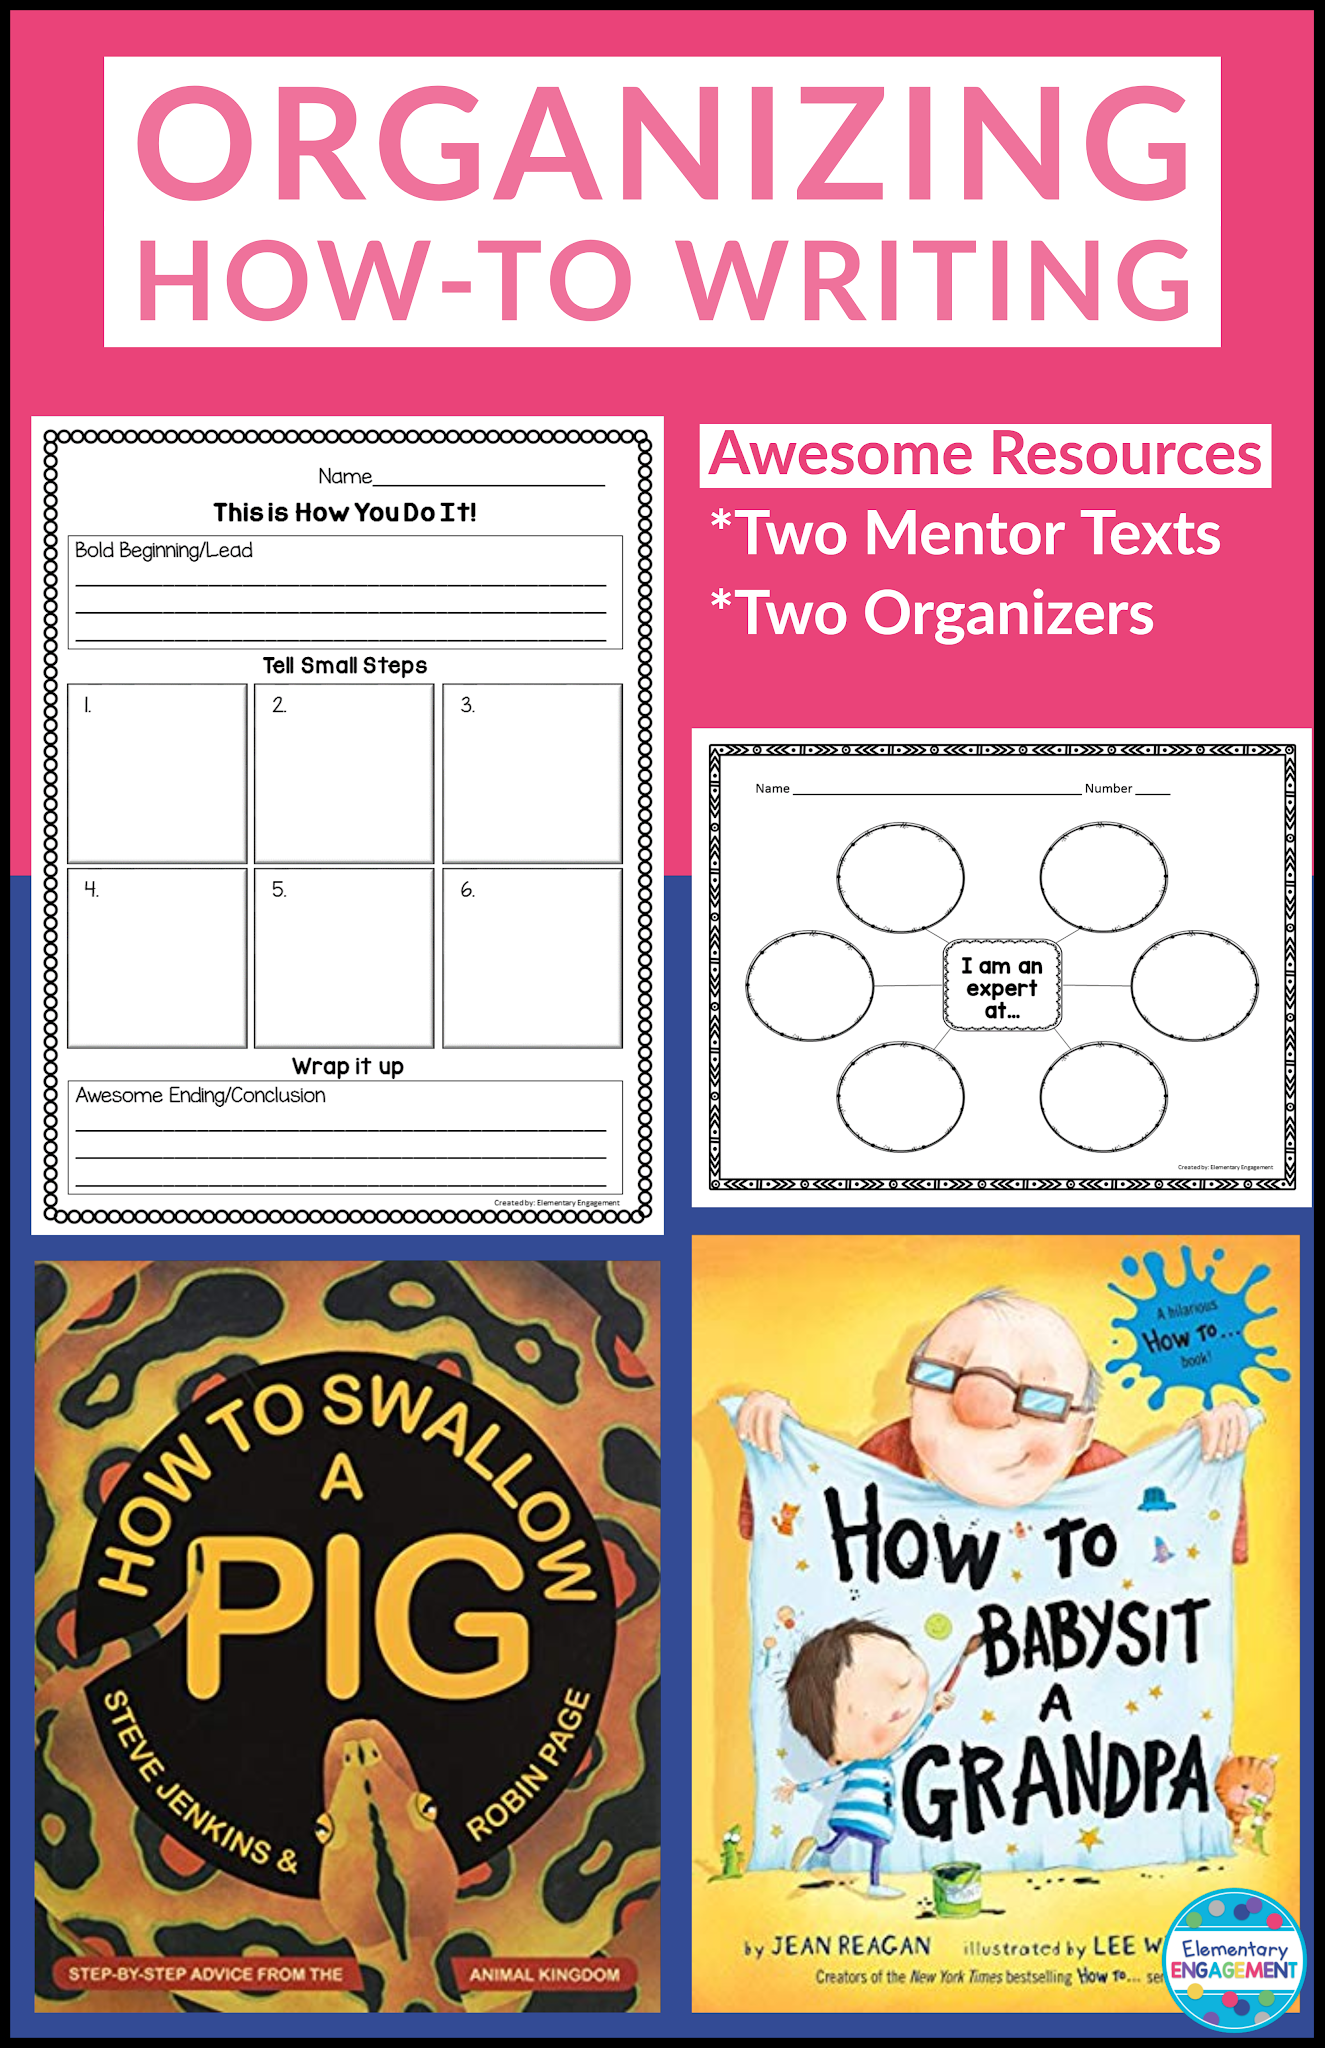 This post shares two great mentor texts and two free brainstorming forms for students to create their own how-to book.